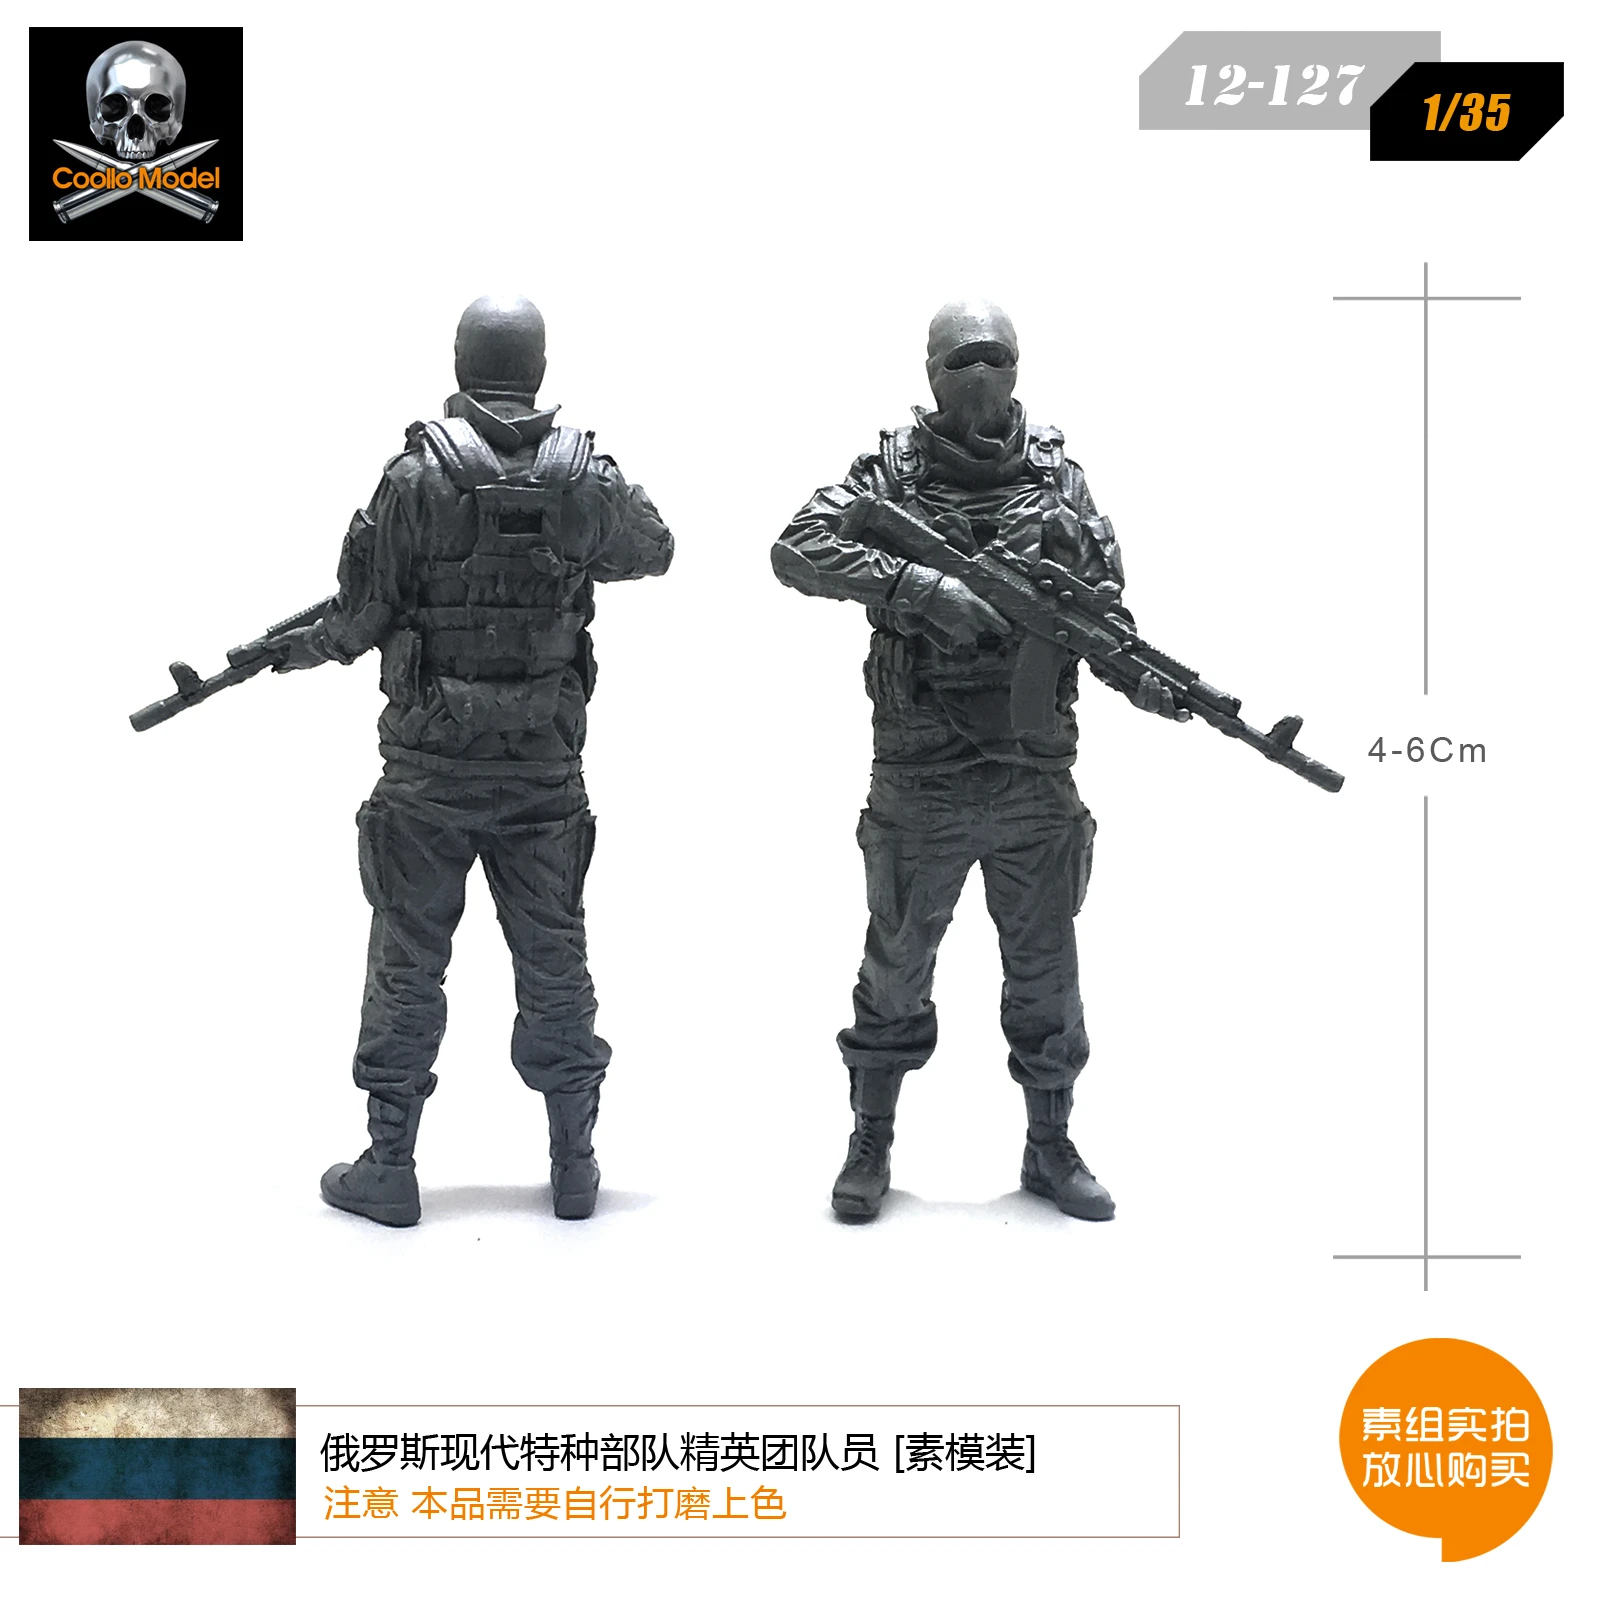 1/35 Resin Model Modern Russian Soldier Special Force Man Army Commando Military